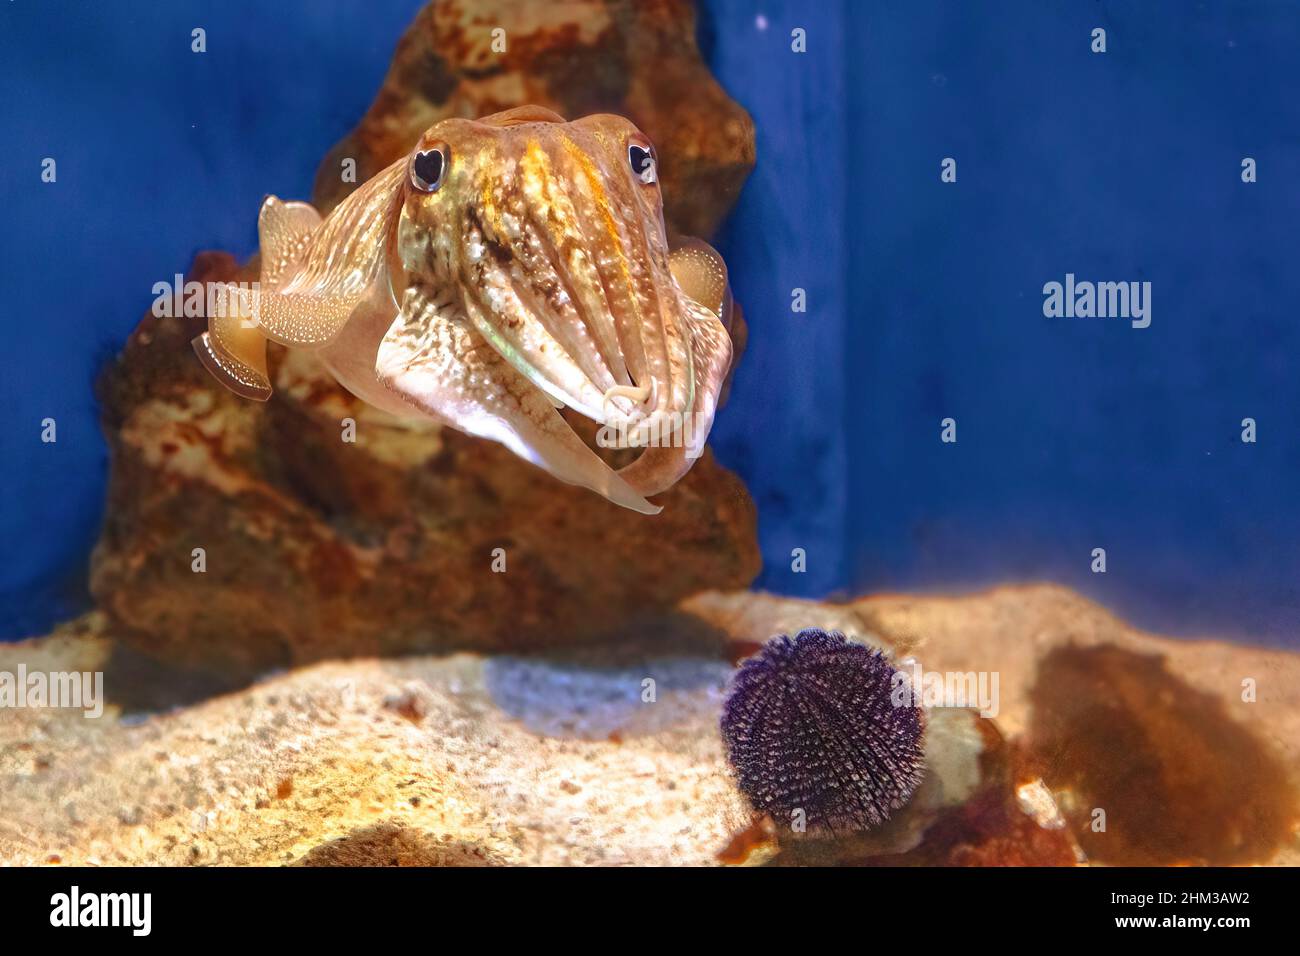 front view of a Sepia officinalis species living in the Mediterranean Sea, North Sea, and Baltic Sea or South Africa. Common cuttlefish in aquarium Stock Photo